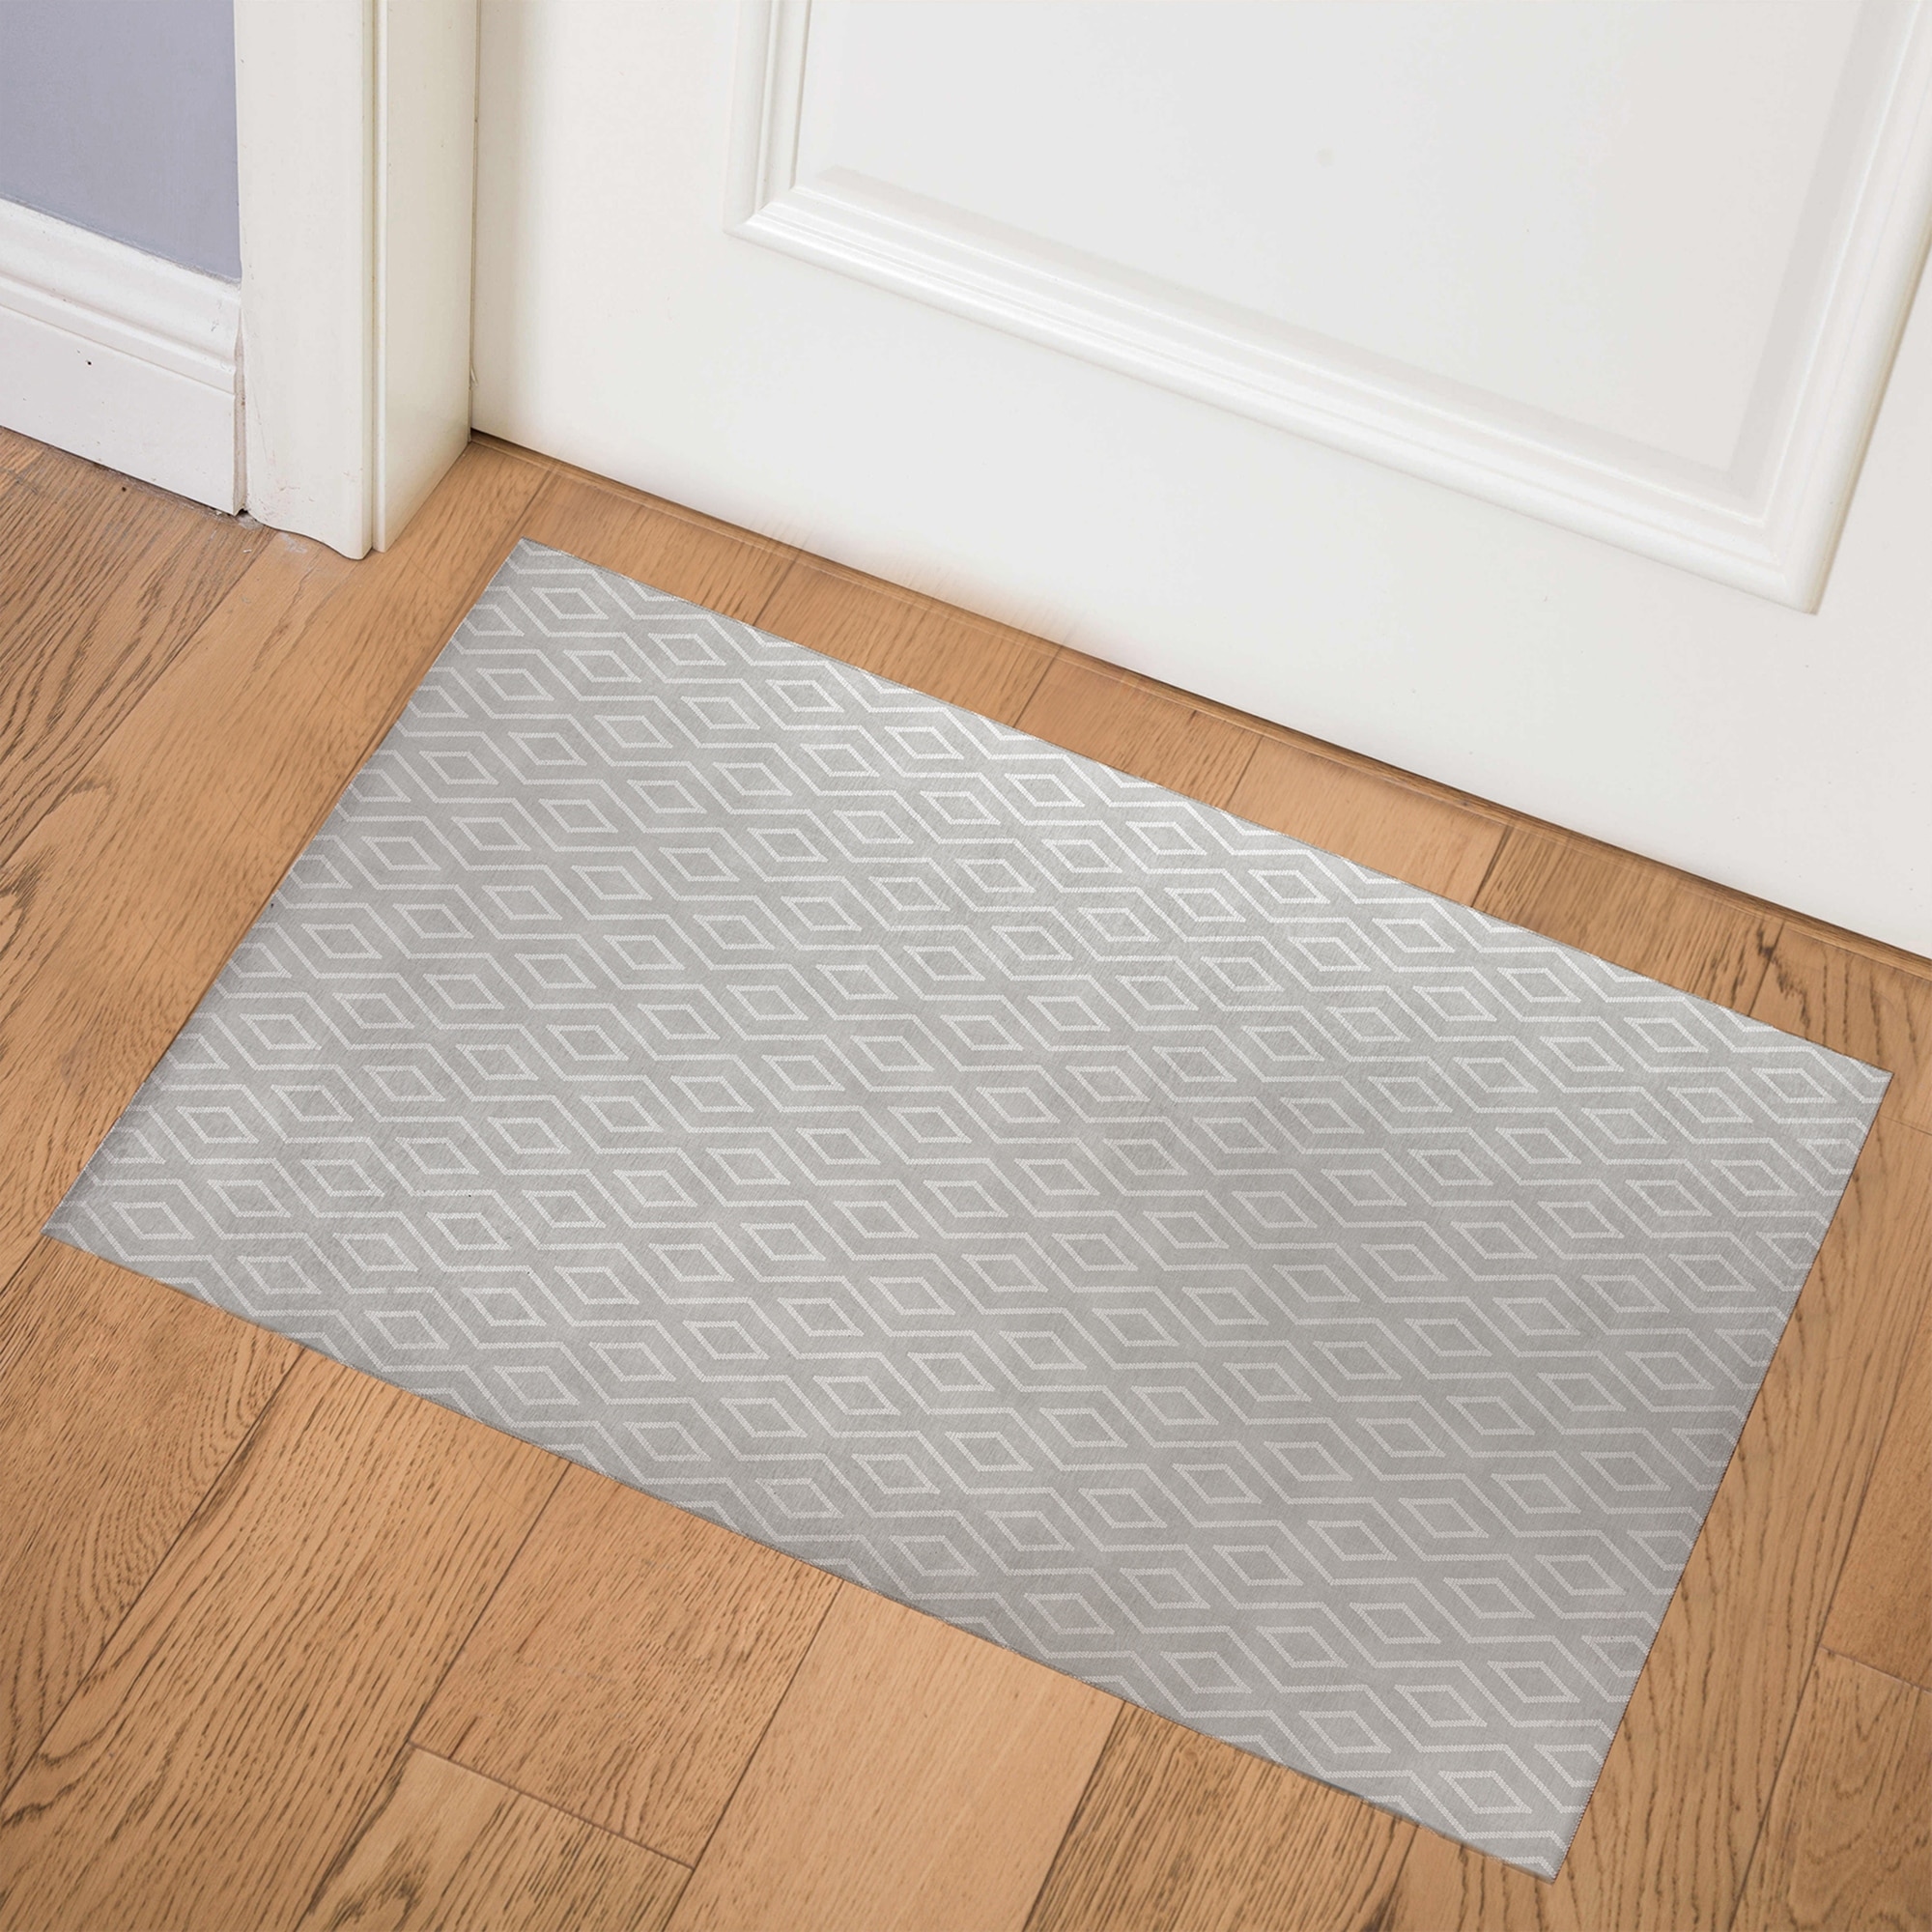 https://ak1.ostkcdn.com/images/products/is/images/direct/a5fc9a3096fe963d001bfa5269b81601a59ee923/INCA-TRIBAL-GREY-Indoor-Floor-Mat-By-Becky-Bailey.jpg